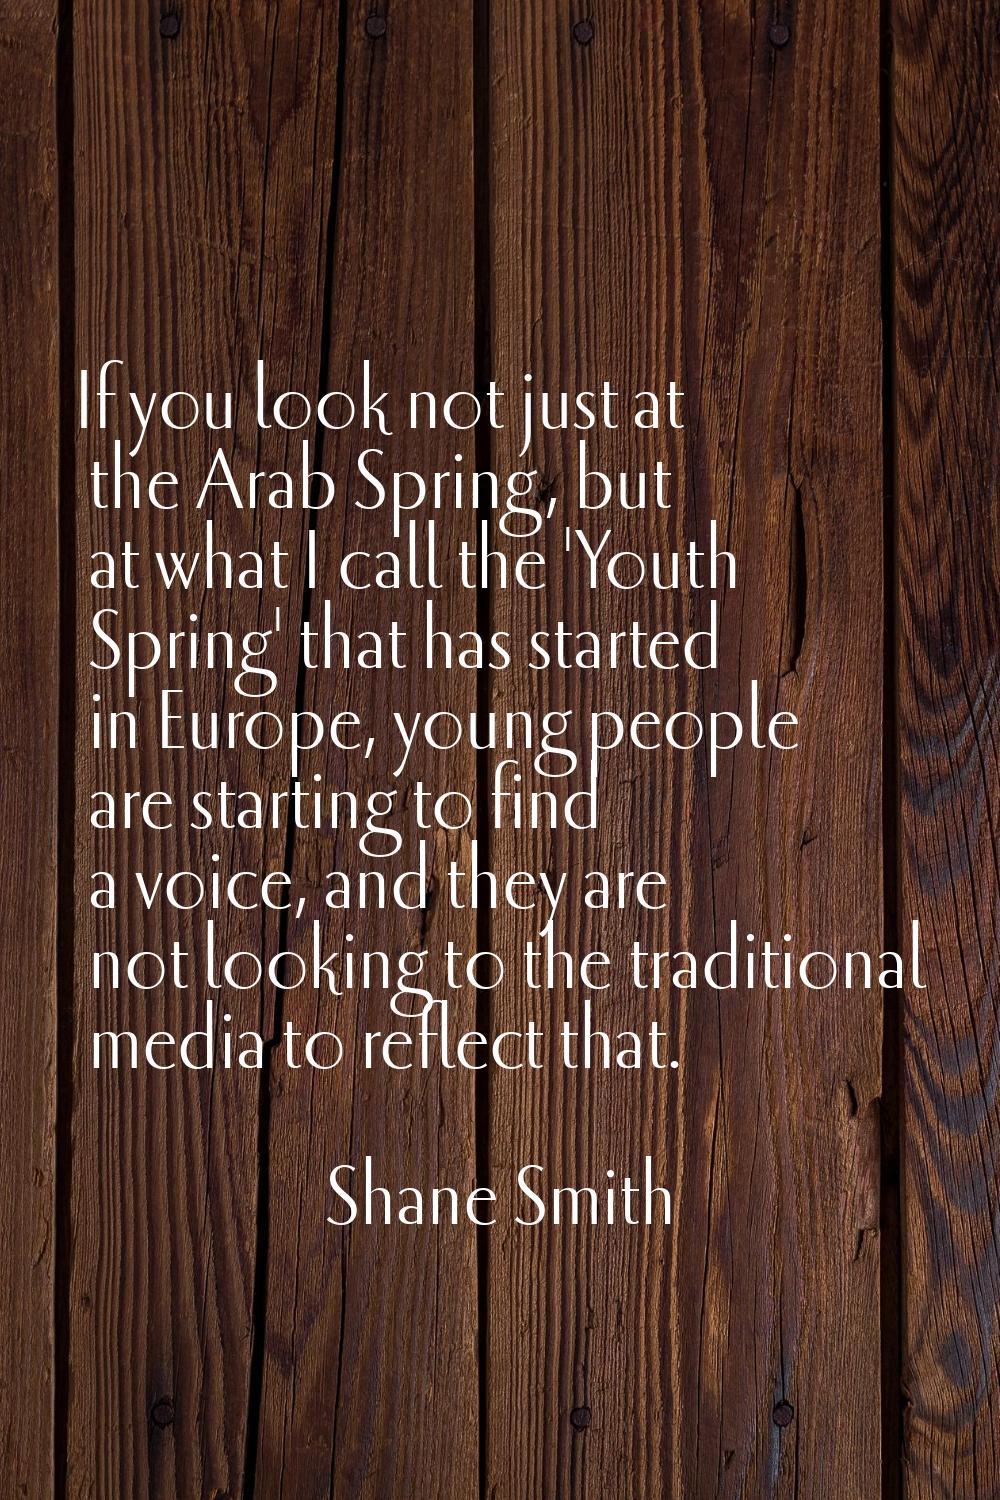 If you look not just at the Arab Spring, but at what I call the 'Youth Spring' that has started in 